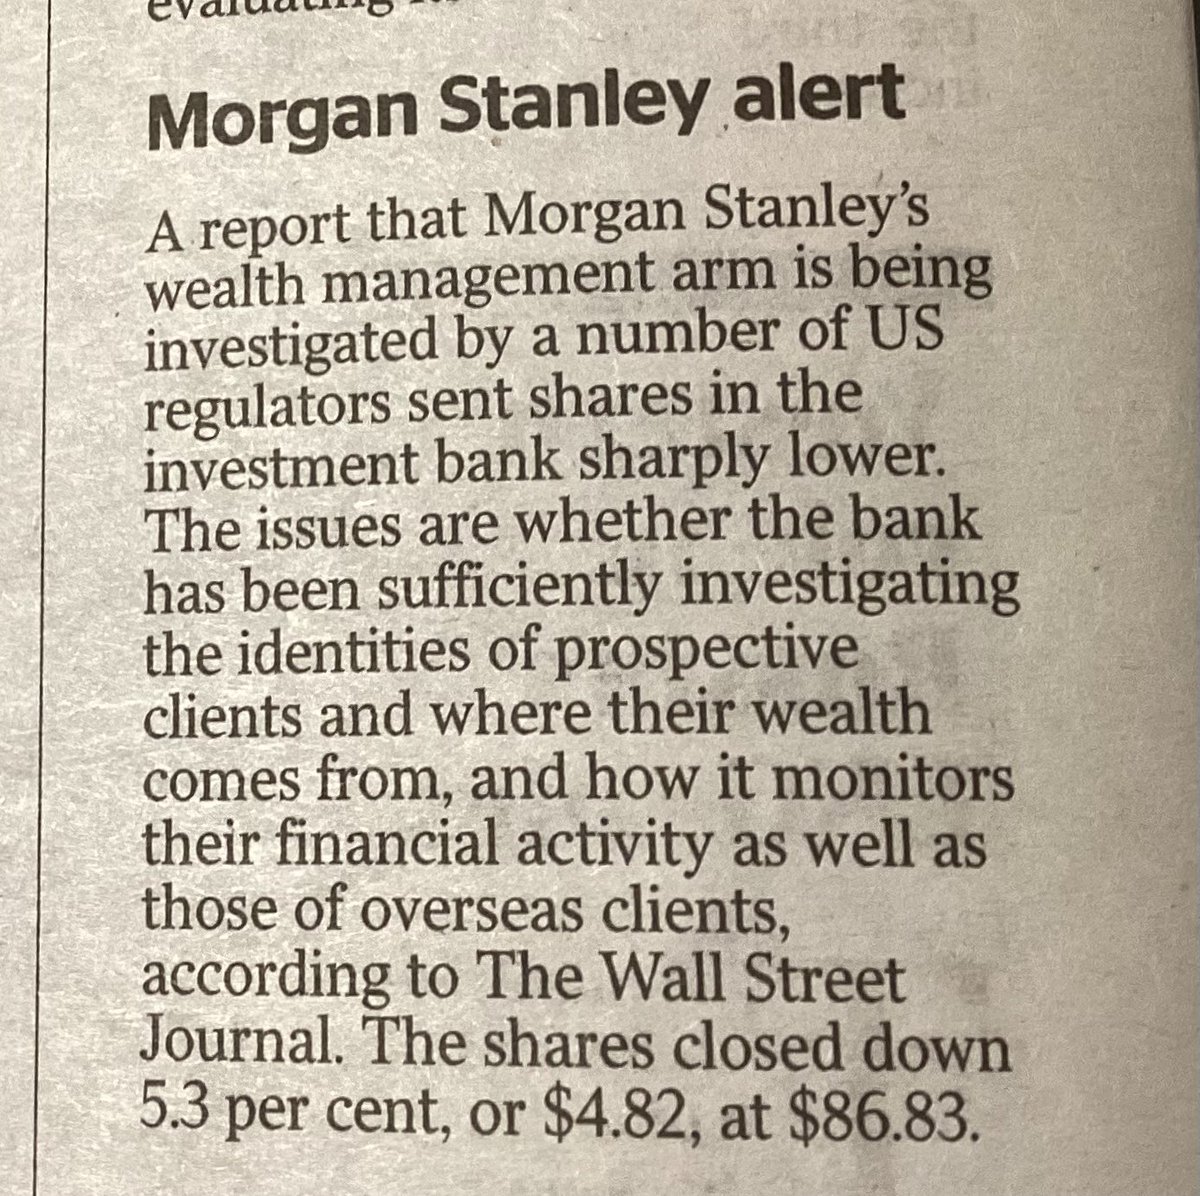 Here you go “A report that Morgan Stanley’s wealth management arm is being investigated by a number of US regulators sent shares in the investment bank sharply lower” @thetimes